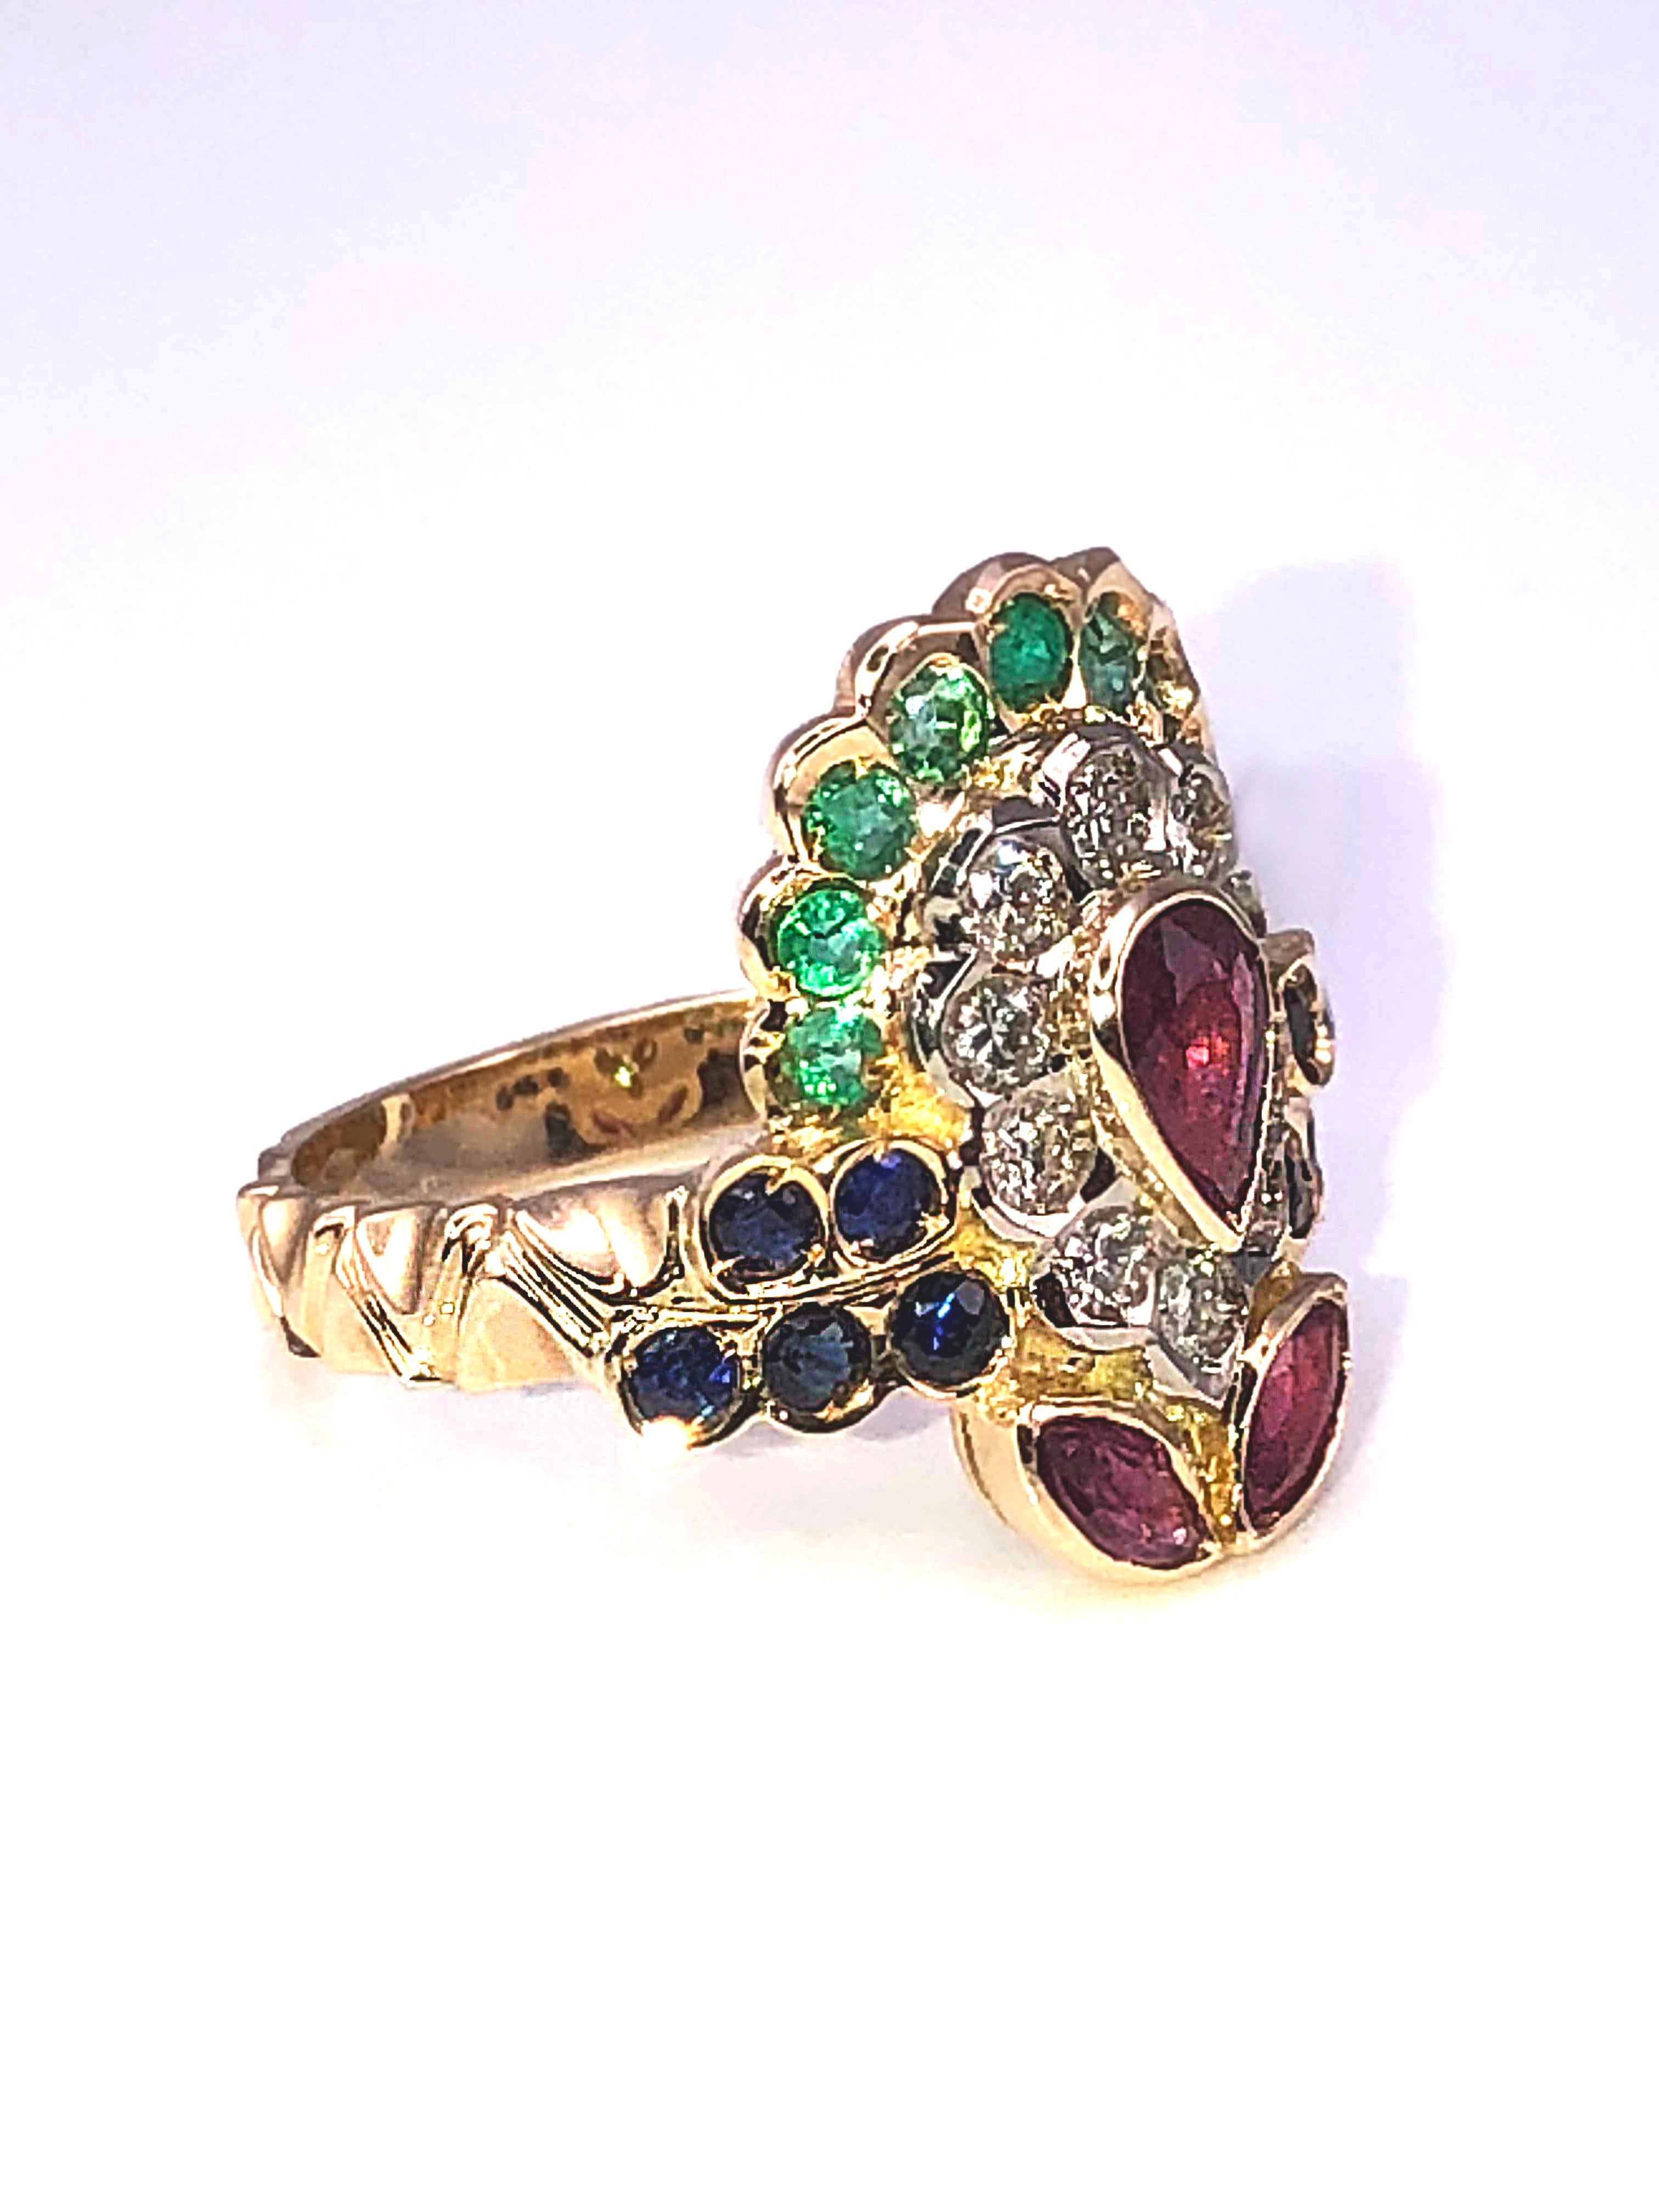 S.Georgios design ring handmade from solid 18 Karat Yellow Gold. This Multicolour Byzantine style ring features 10 Brilliant cut Diamonds in a total weight of 0.32 Carat, center Pear Shape Ruby, 2 Marquize Cut Rubies,  10 Brilliant Cut Sapphires and